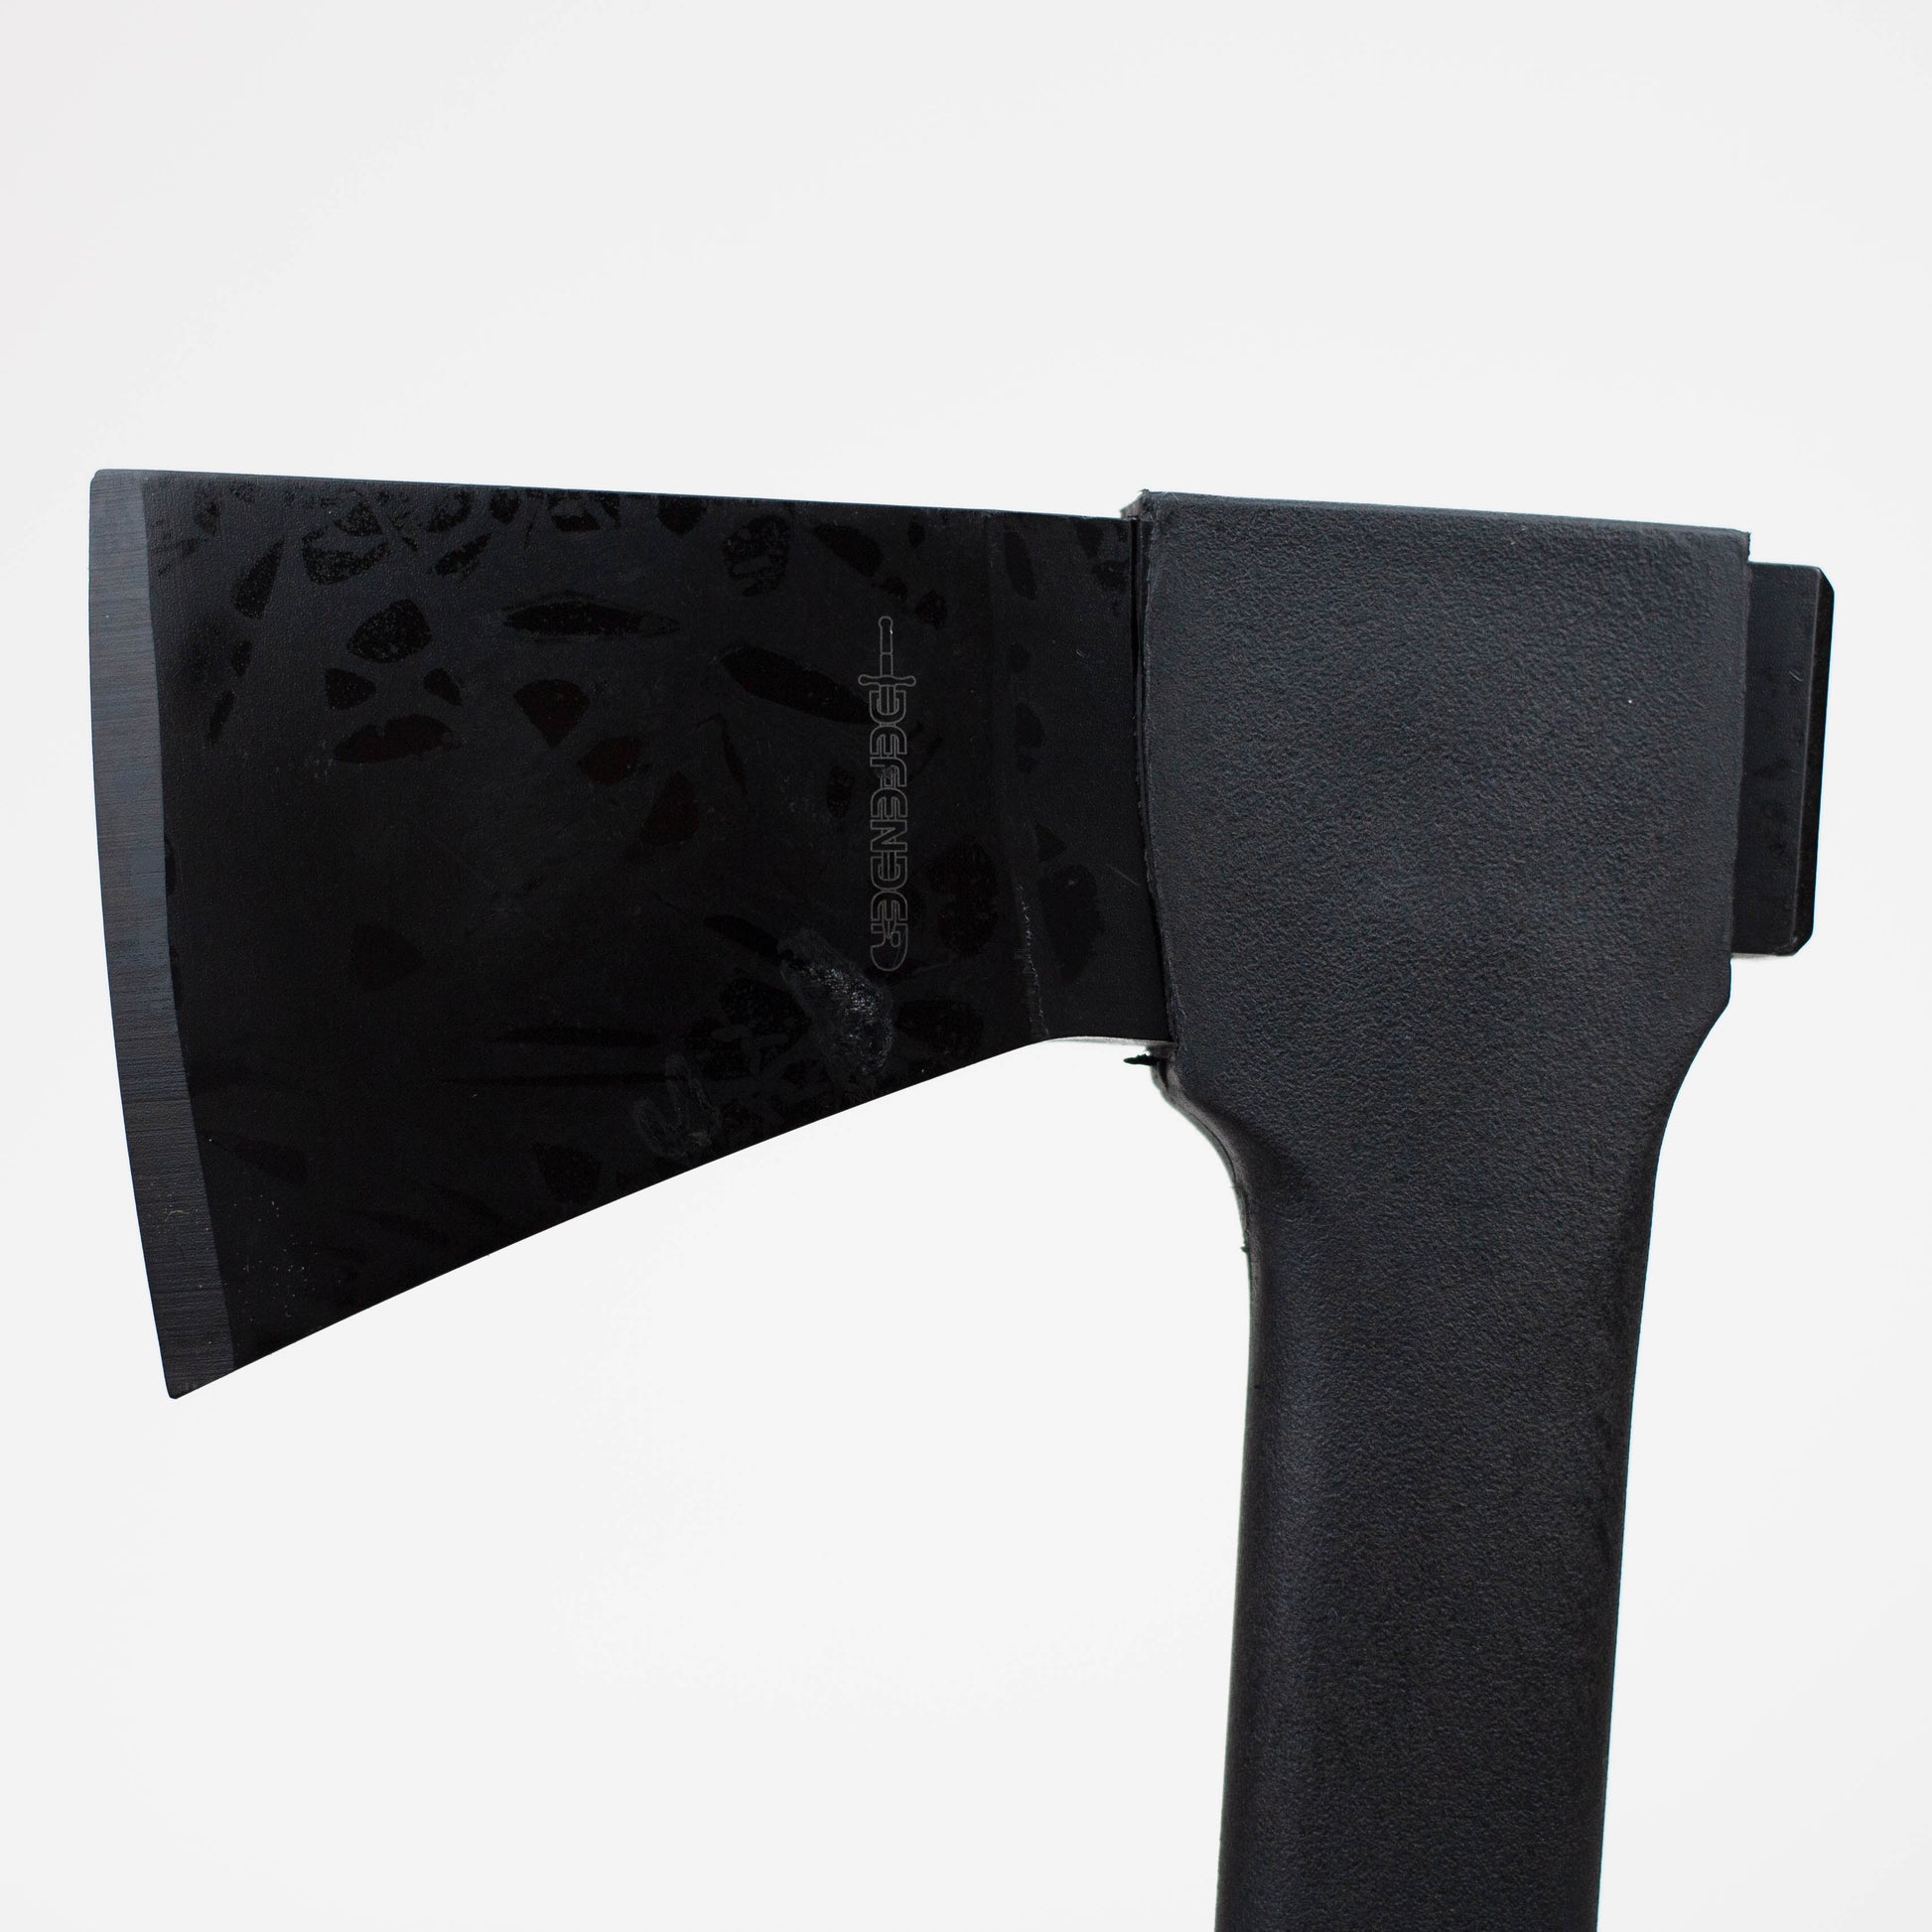 14" Tactical  Axe Hunting Fighting Axe [6326]_2